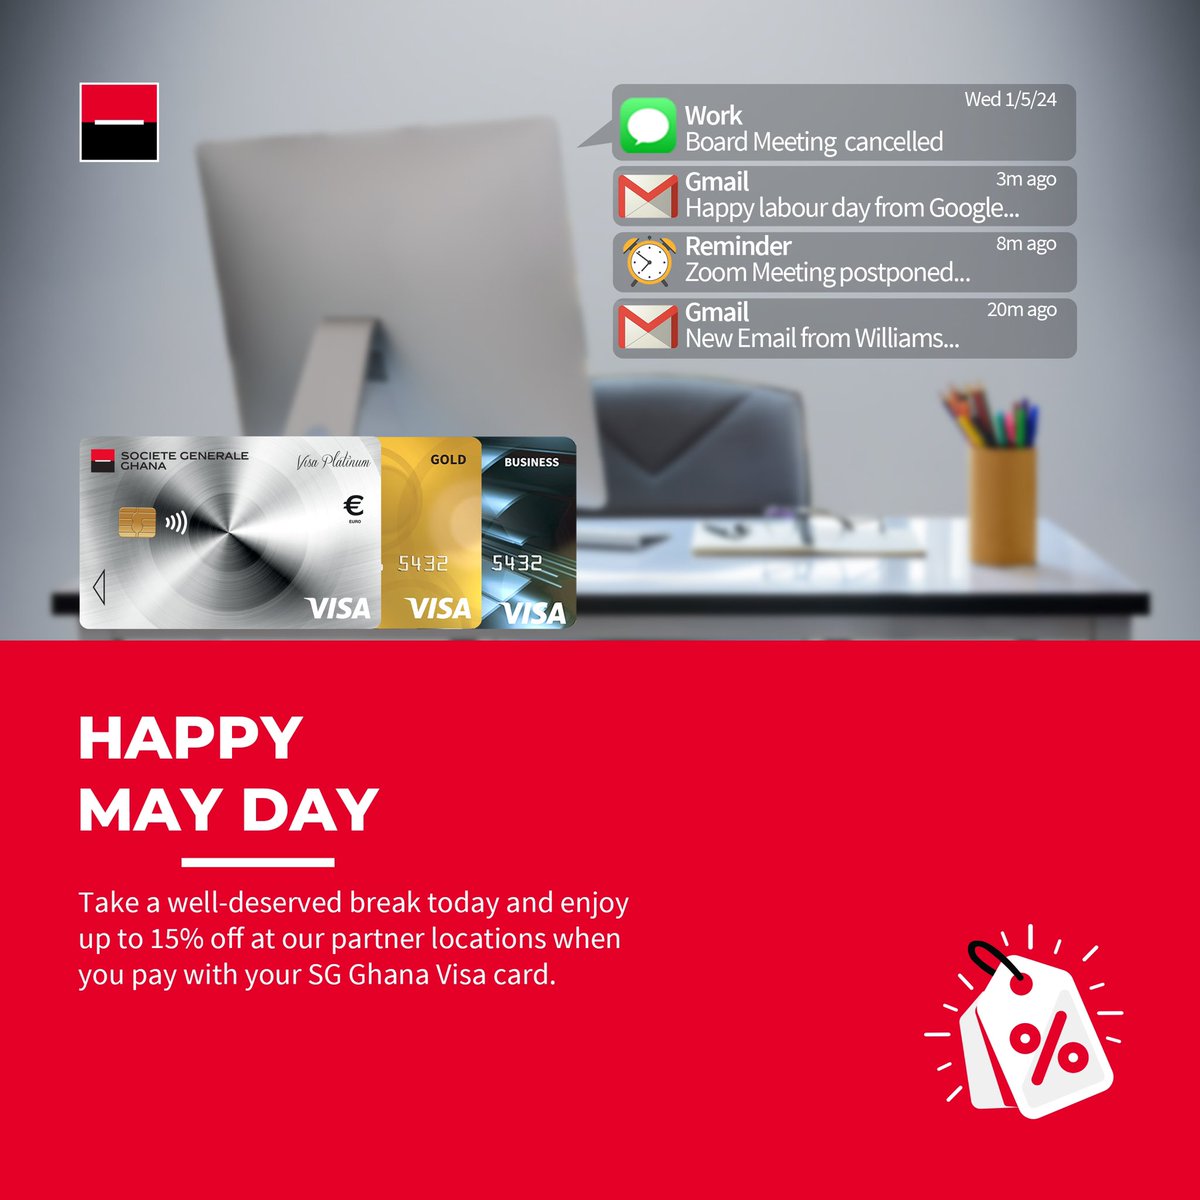 It’s not just May Day; it’s “our day” to relax and take a well-deserved break!

Enjoy up to 15% discount at our partner locations when you make payment with your SG Ghana Visa card. 

Learn more: societegenerale.com.gh/en/individual/… 

#SGGhana #LabourDay